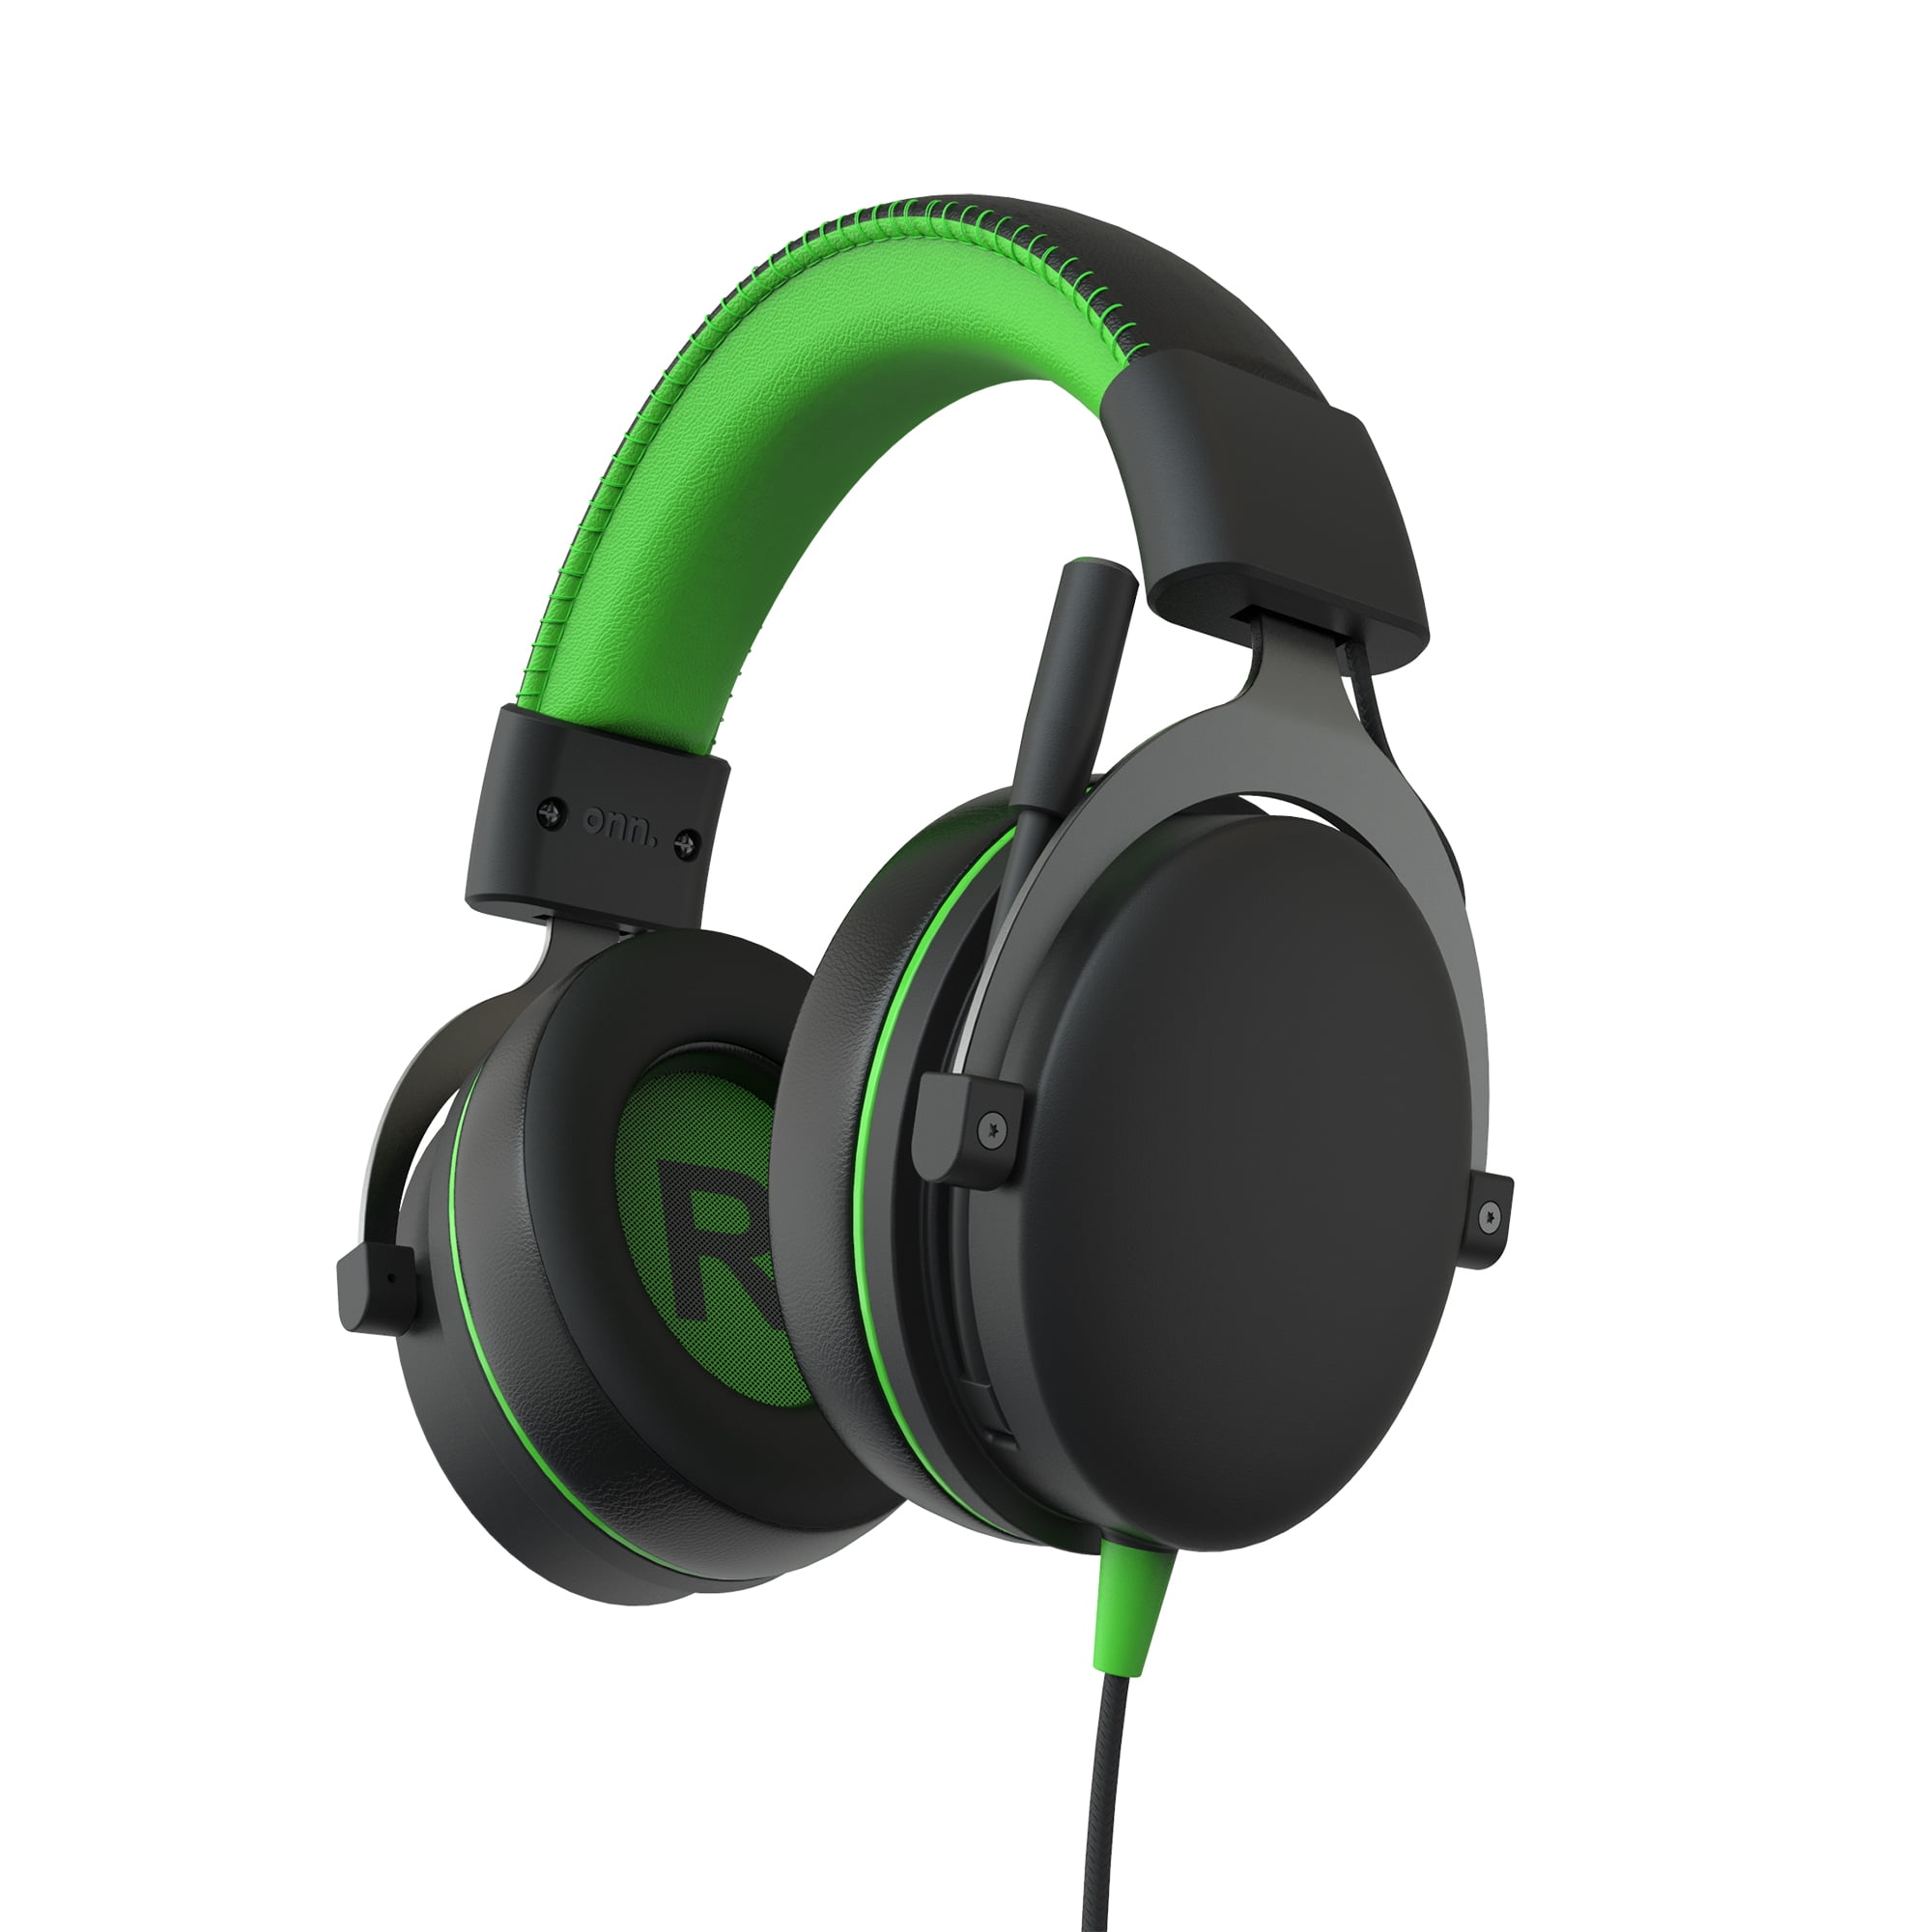 onn Xbox Wired Video Game Headset with 3.5mm Connector, Flip-to-Mute Mic, Cooling Gel Earpads and 50mm Speakers - Black and Green